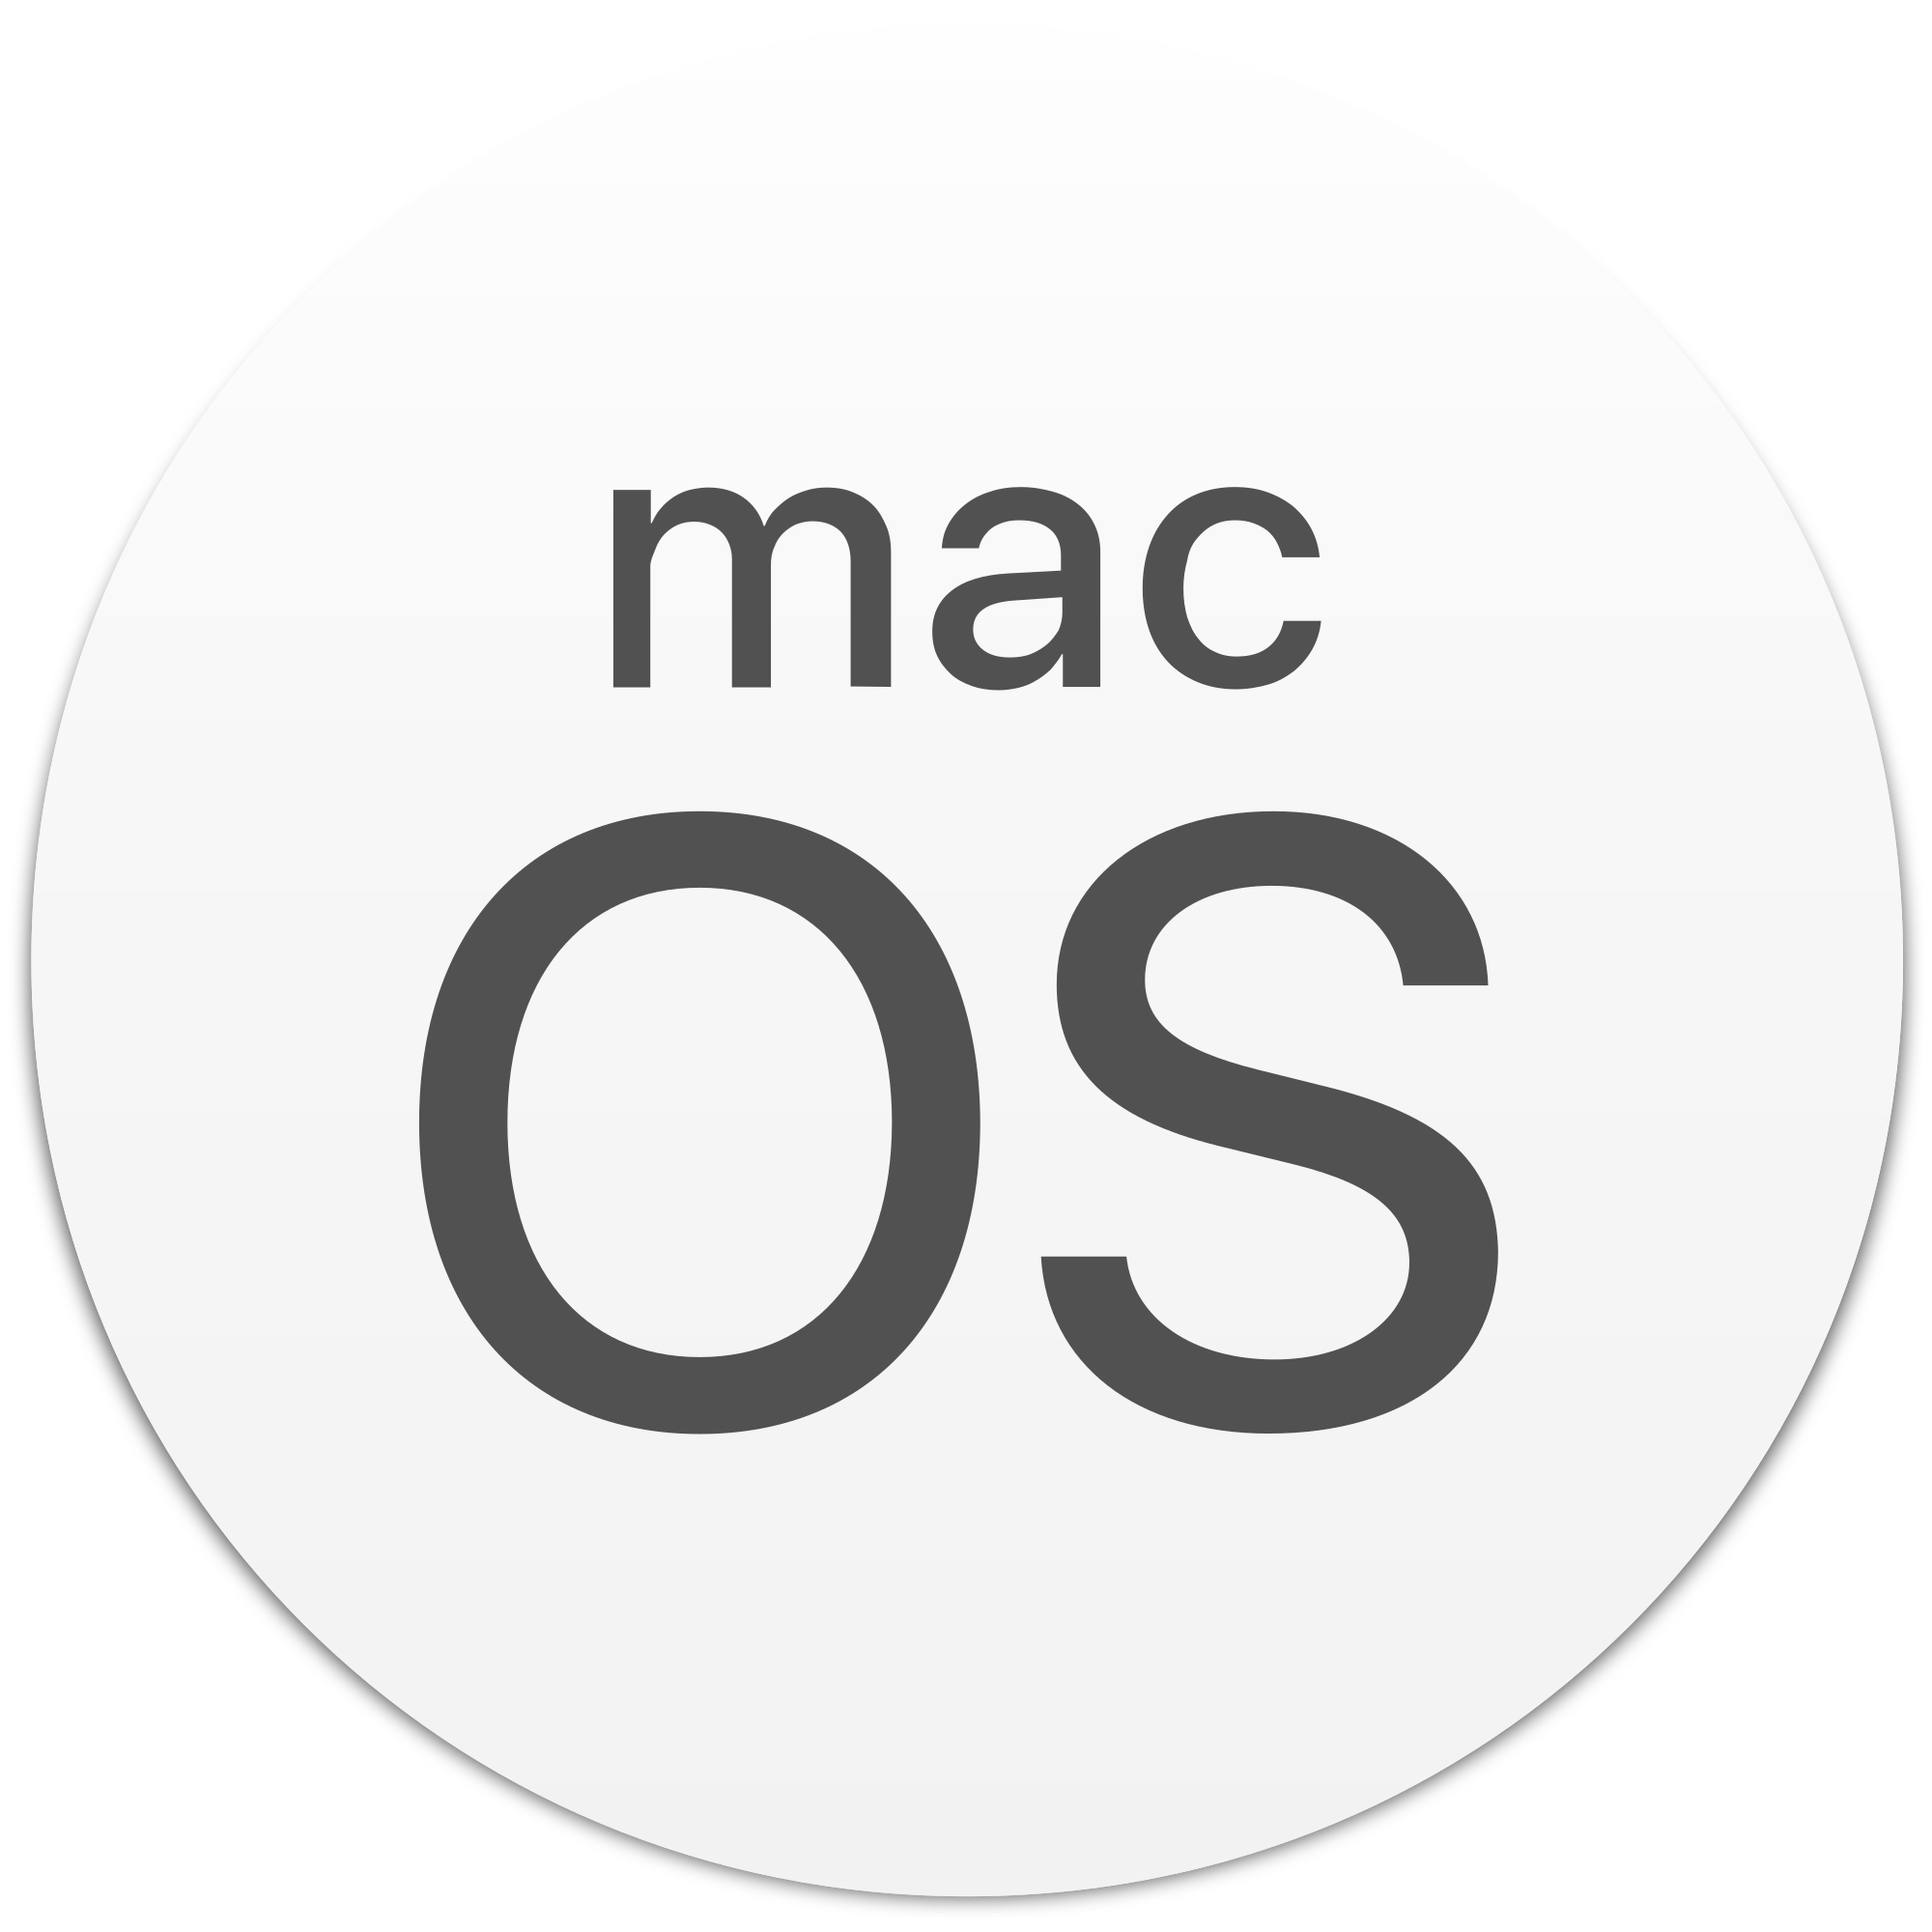 install openssl for wget mac